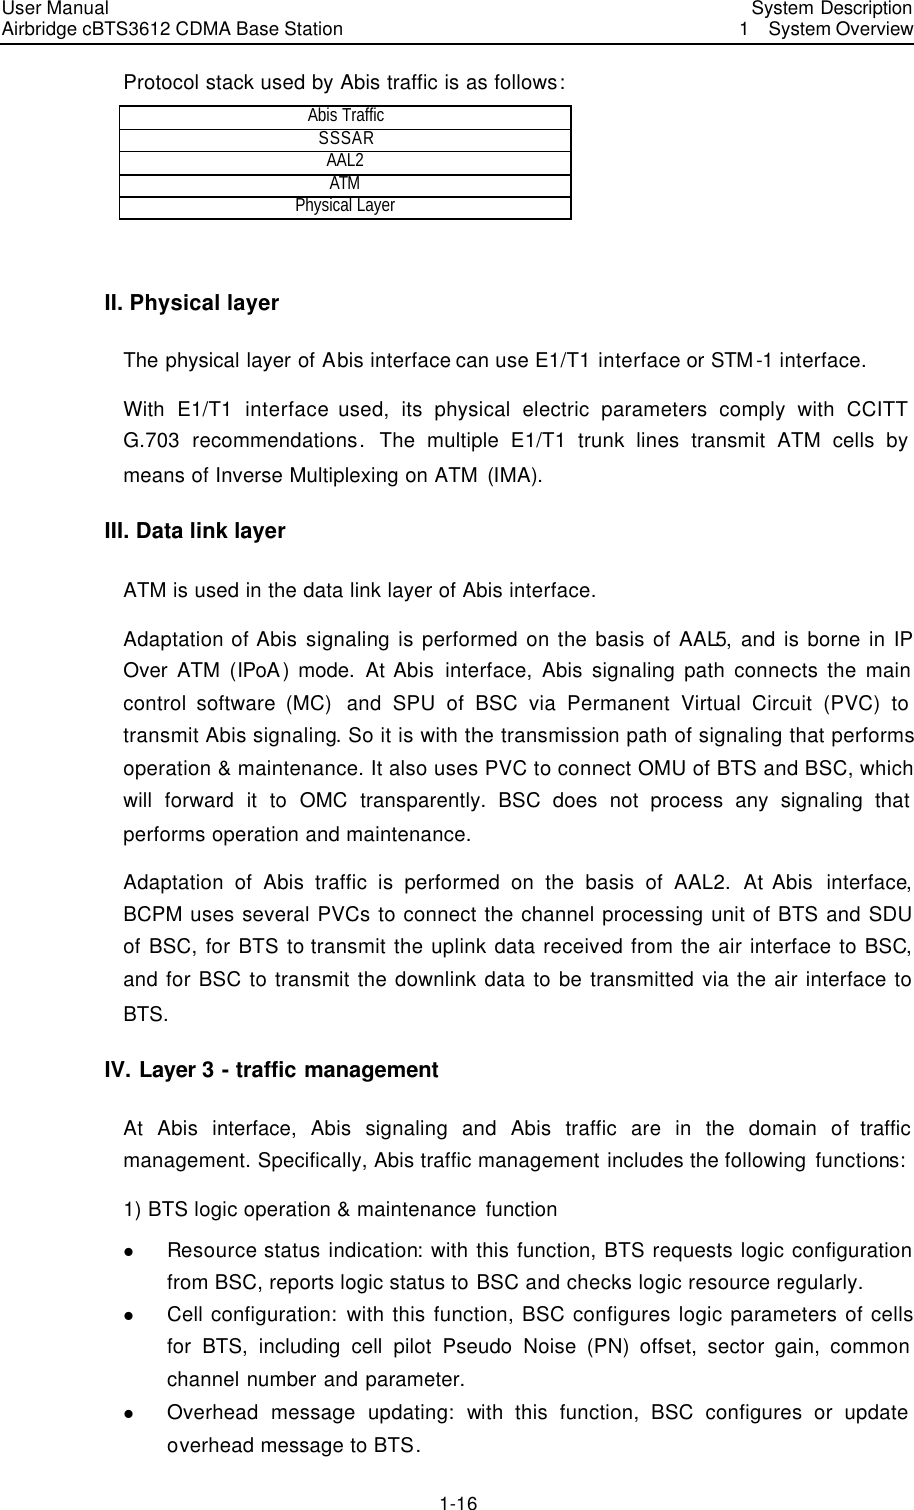 User Manual Airbridge cBTS3612 CDMA Base Station   System Description1  System Overview 1-16 Protocol stack used by Abis traffic is as follows:   Abis Traffic SSSAR AAL2 ATM  Physical Layer  II. Physical layer The physical layer of Abis interface can use E1/T1 interface or STM -1 interface.   With E1/T1 interface used, its physical electric parameters comply with CCITT G.703 recommendations.  The multiple E1/T1 trunk lines transmit ATM cells by means of Inverse Multiplexing on ATM (IMA). III. Data link layer ATM is used in the data link layer of Abis interface.   Adaptation of Abis signaling is performed on the basis of AAL5, and is borne in IP Over ATM (IPoA) mode. At Abis interface, Abis signaling path connects the main control software (MC)  and SPU of BSC via Permanent Virtual Circuit (PVC) to transmit Abis signaling. So it is with the transmission path of signaling that performs operation &amp; maintenance. It also uses PVC to connect OMU of BTS and BSC, which will forward it to OMC transparently. BSC does not process any signaling that performs operation and maintenance.   Adaptation of Abis traffic is performed on the basis of AAL2. At Abis  interface, BCPM uses several PVCs to connect the channel processing unit of BTS and SDU of BSC, for BTS to transmit the uplink data received from the air interface to BSC, and for BSC to transmit the downlink data to be transmitted via the air interface to BTS.   IV. Layer 3 - traffic management At Abis interface,  Abis signaling and Abis traffic are in the domain of traffic management. Specifically, Abis traffic management includes the following functions:   1) BTS logic operation &amp; maintenance function l Resource status indication: with this function, BTS requests logic configuration from BSC, reports logic status to BSC and checks logic resource regularly. l Cell configuration: with this function, BSC configures logic parameters of cells for BTS, including cell pilot Pseudo Noise (PN) offset, sector gain, common channel number and parameter. l Overhead message updating:  with this function, BSC configures or update overhead message to BTS.   